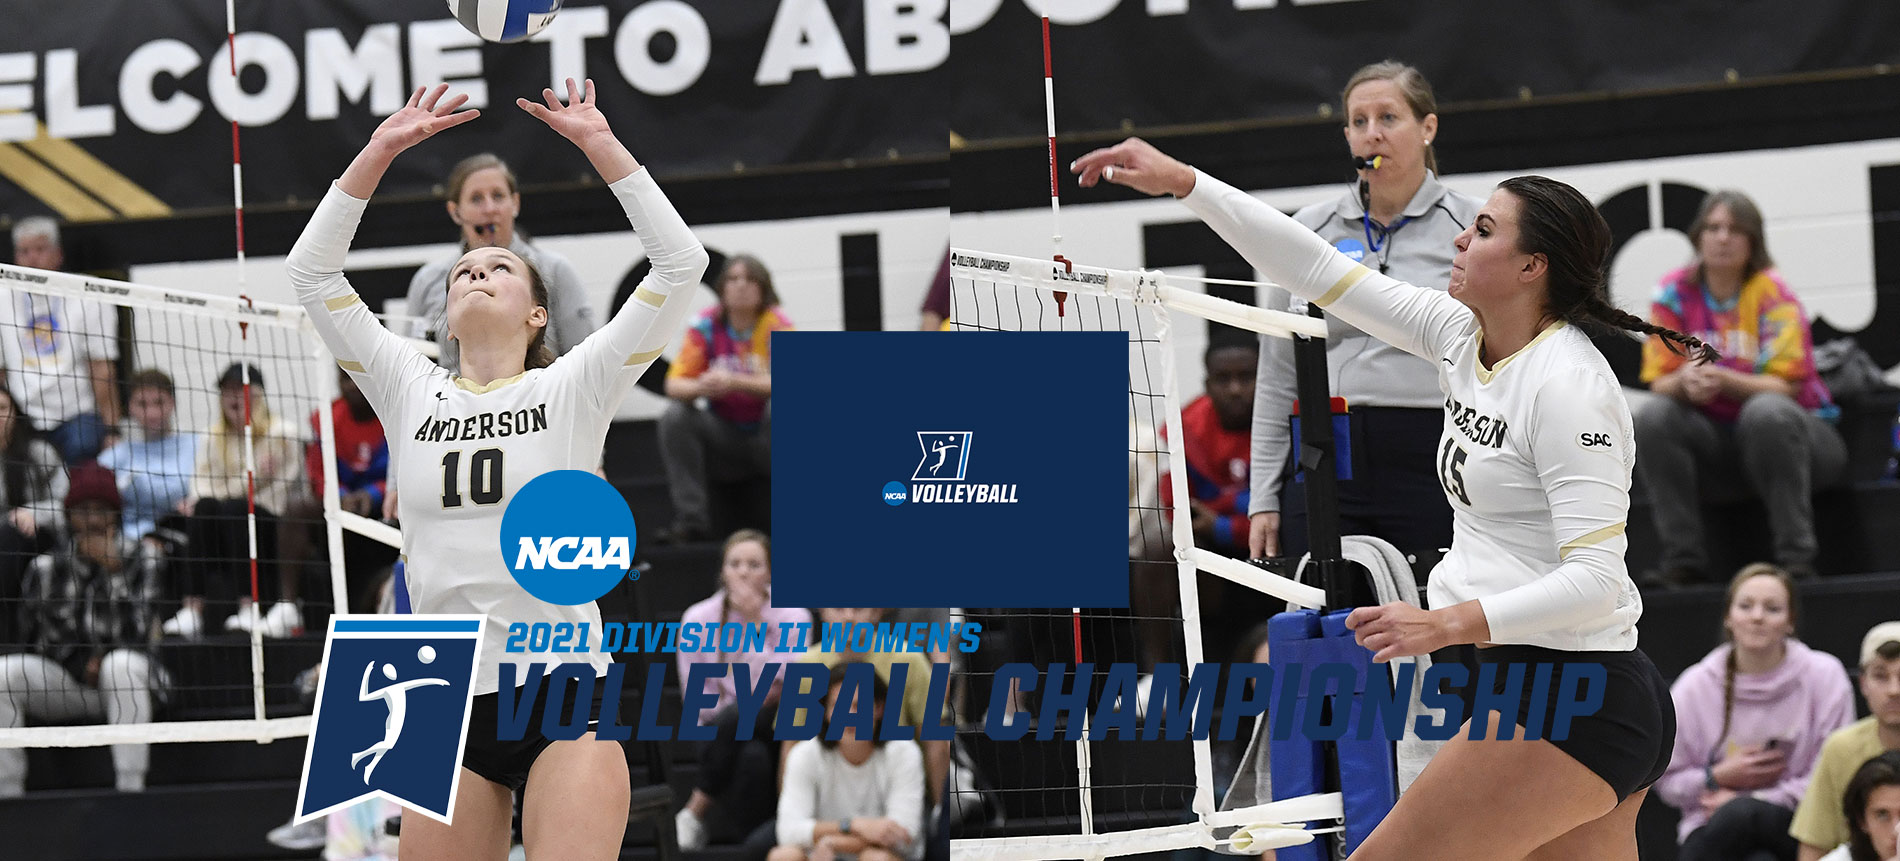 Knutsen and Roy Named to NCAA Southeast Region Championship All-Tournament Team